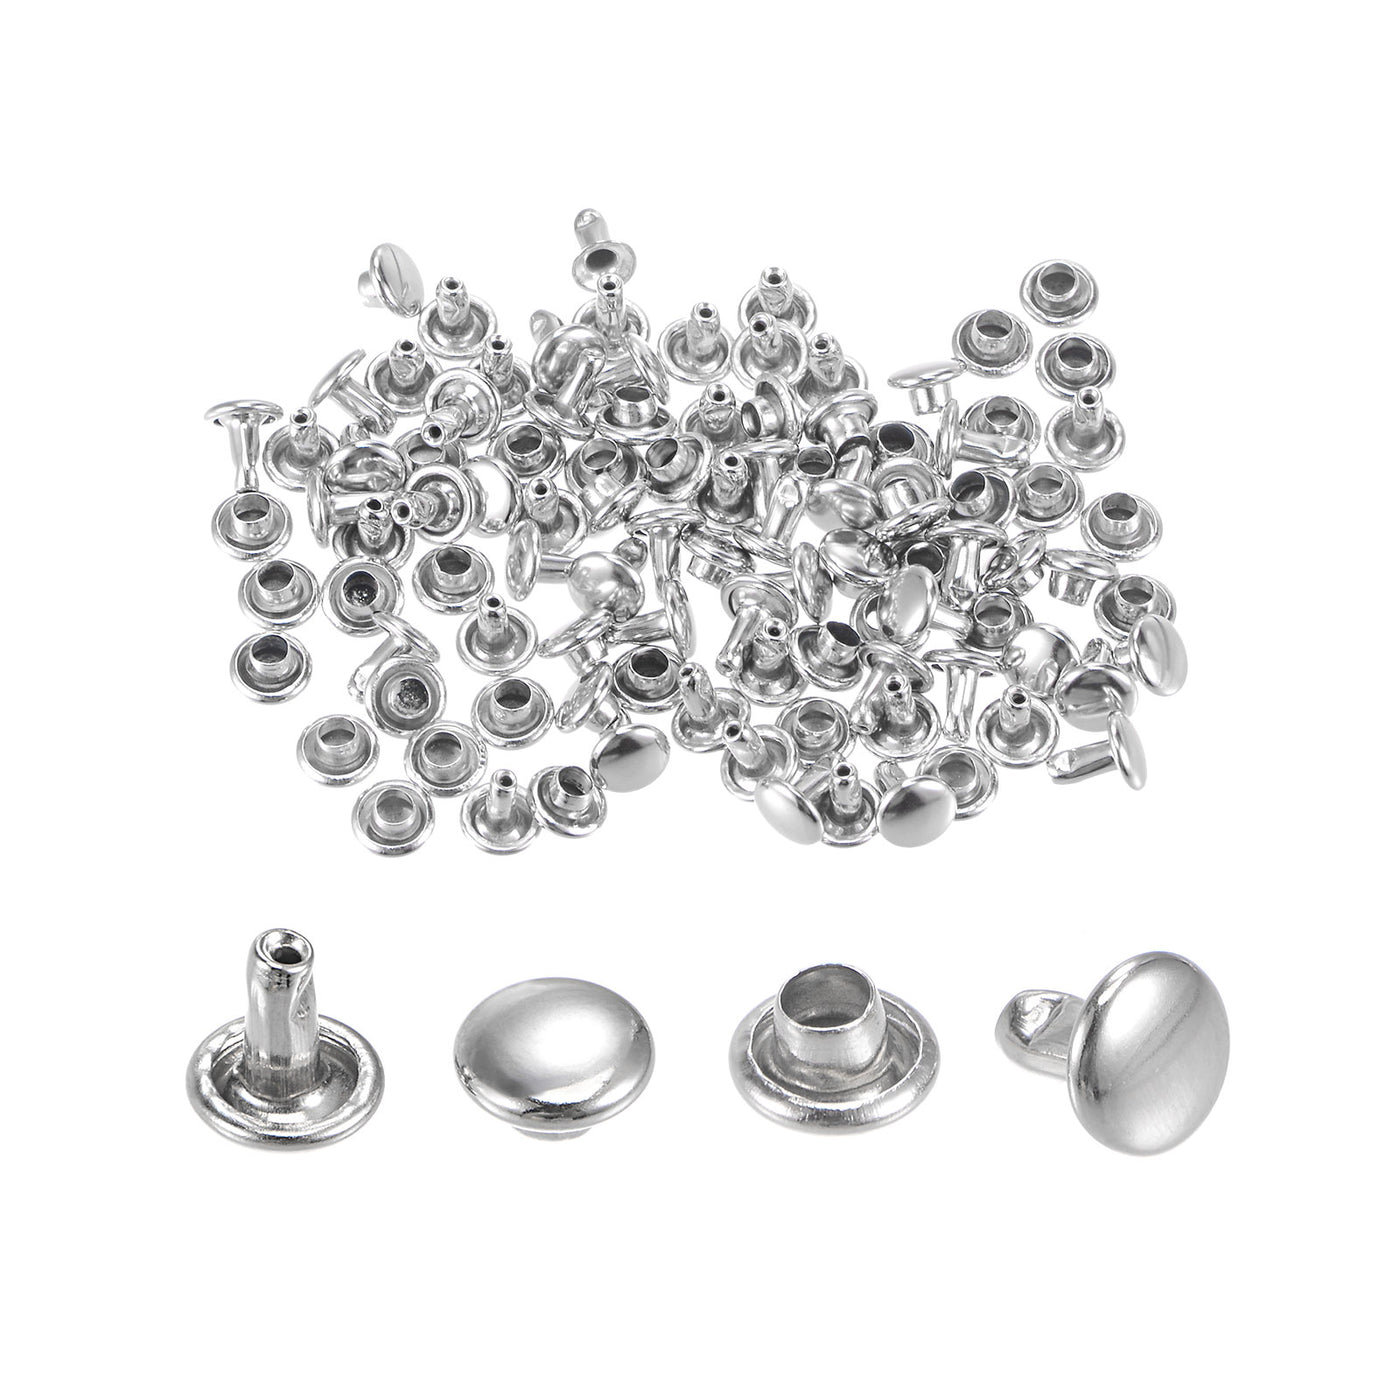 uxcell Uxcell 50 Sets Leather Rivets Silver Tone 6mm Double Cap Brass Rivet Leather Studs